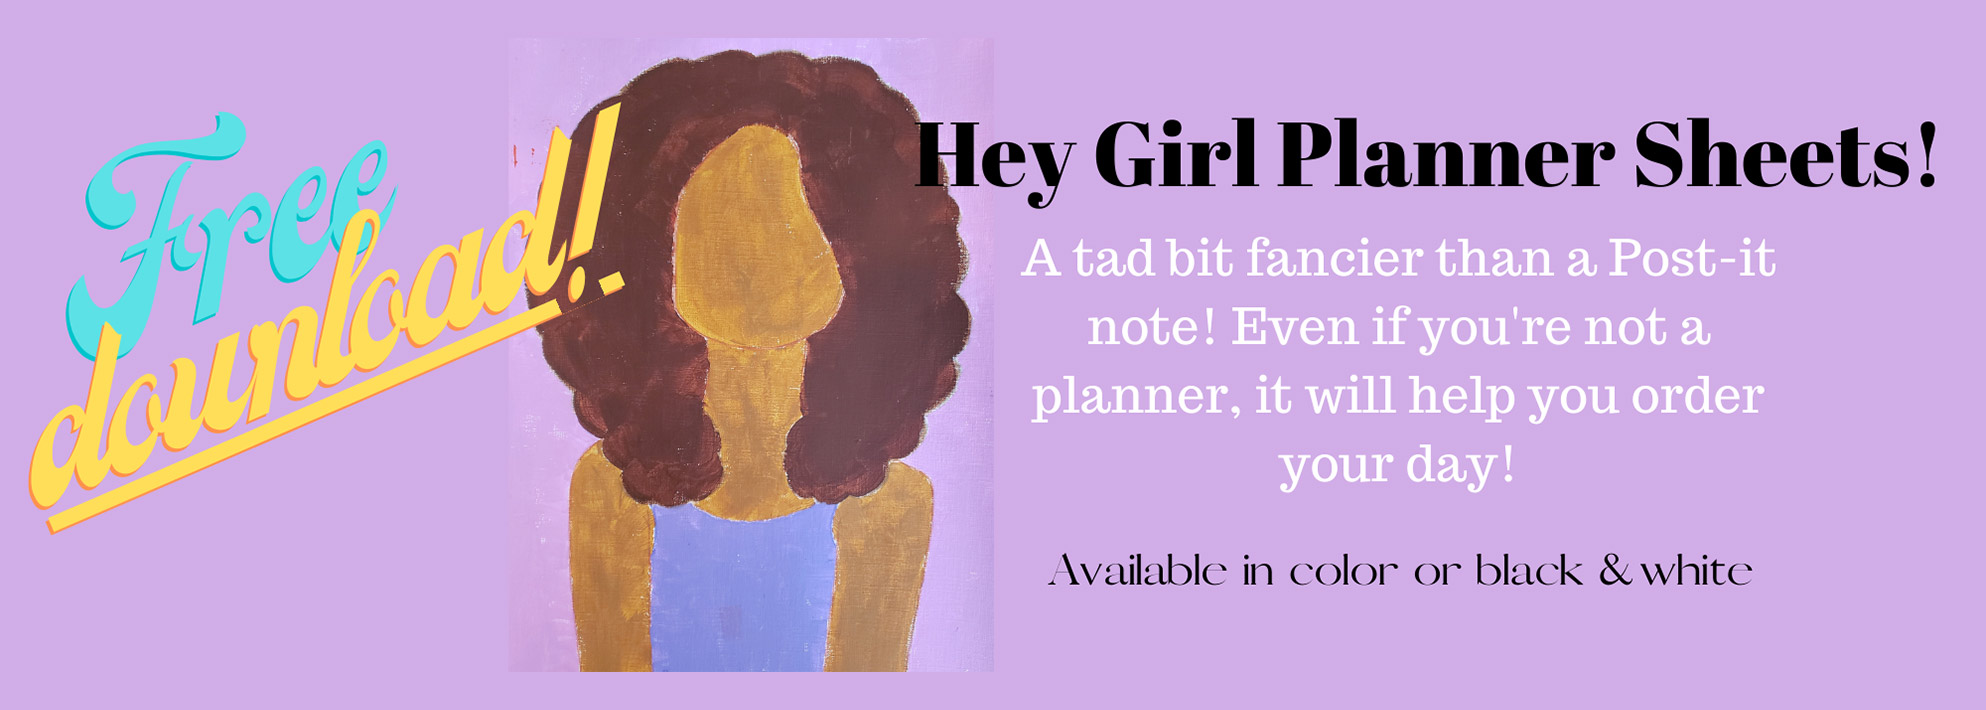 Hey Girl Planner Page